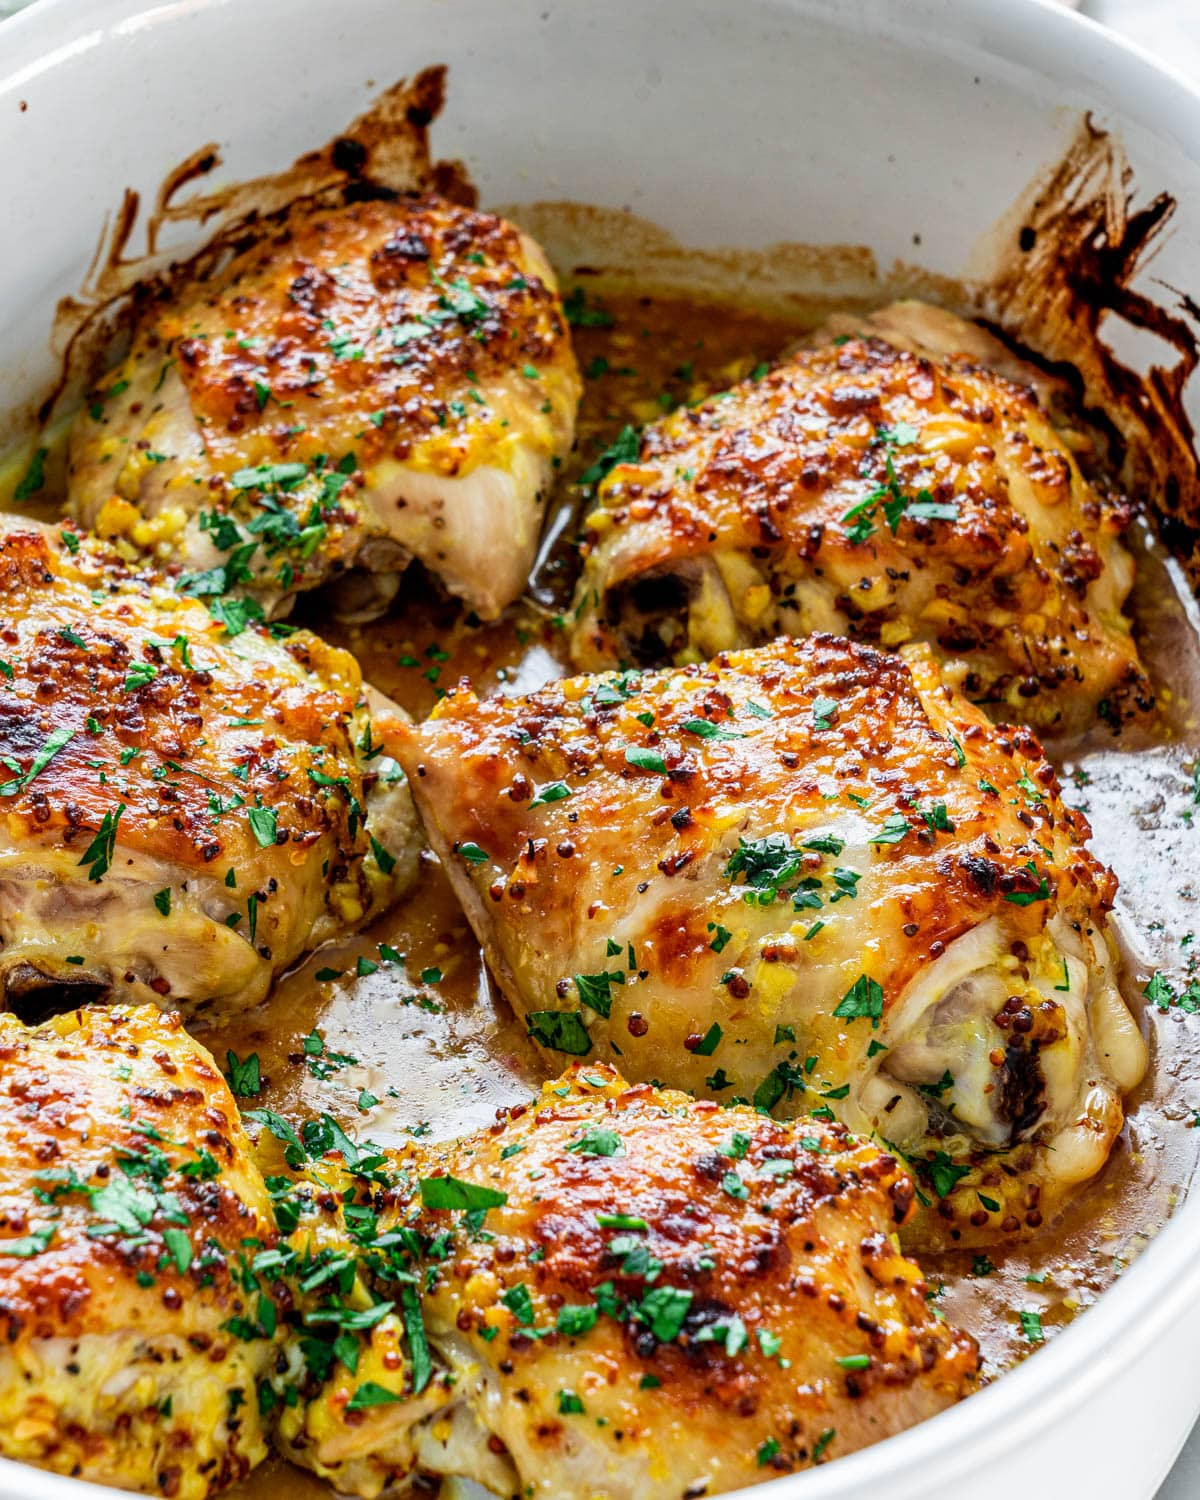 Baked Chicken Thigh Recipes Elegant Oven Baked Chicken Thighs Jo Cooks